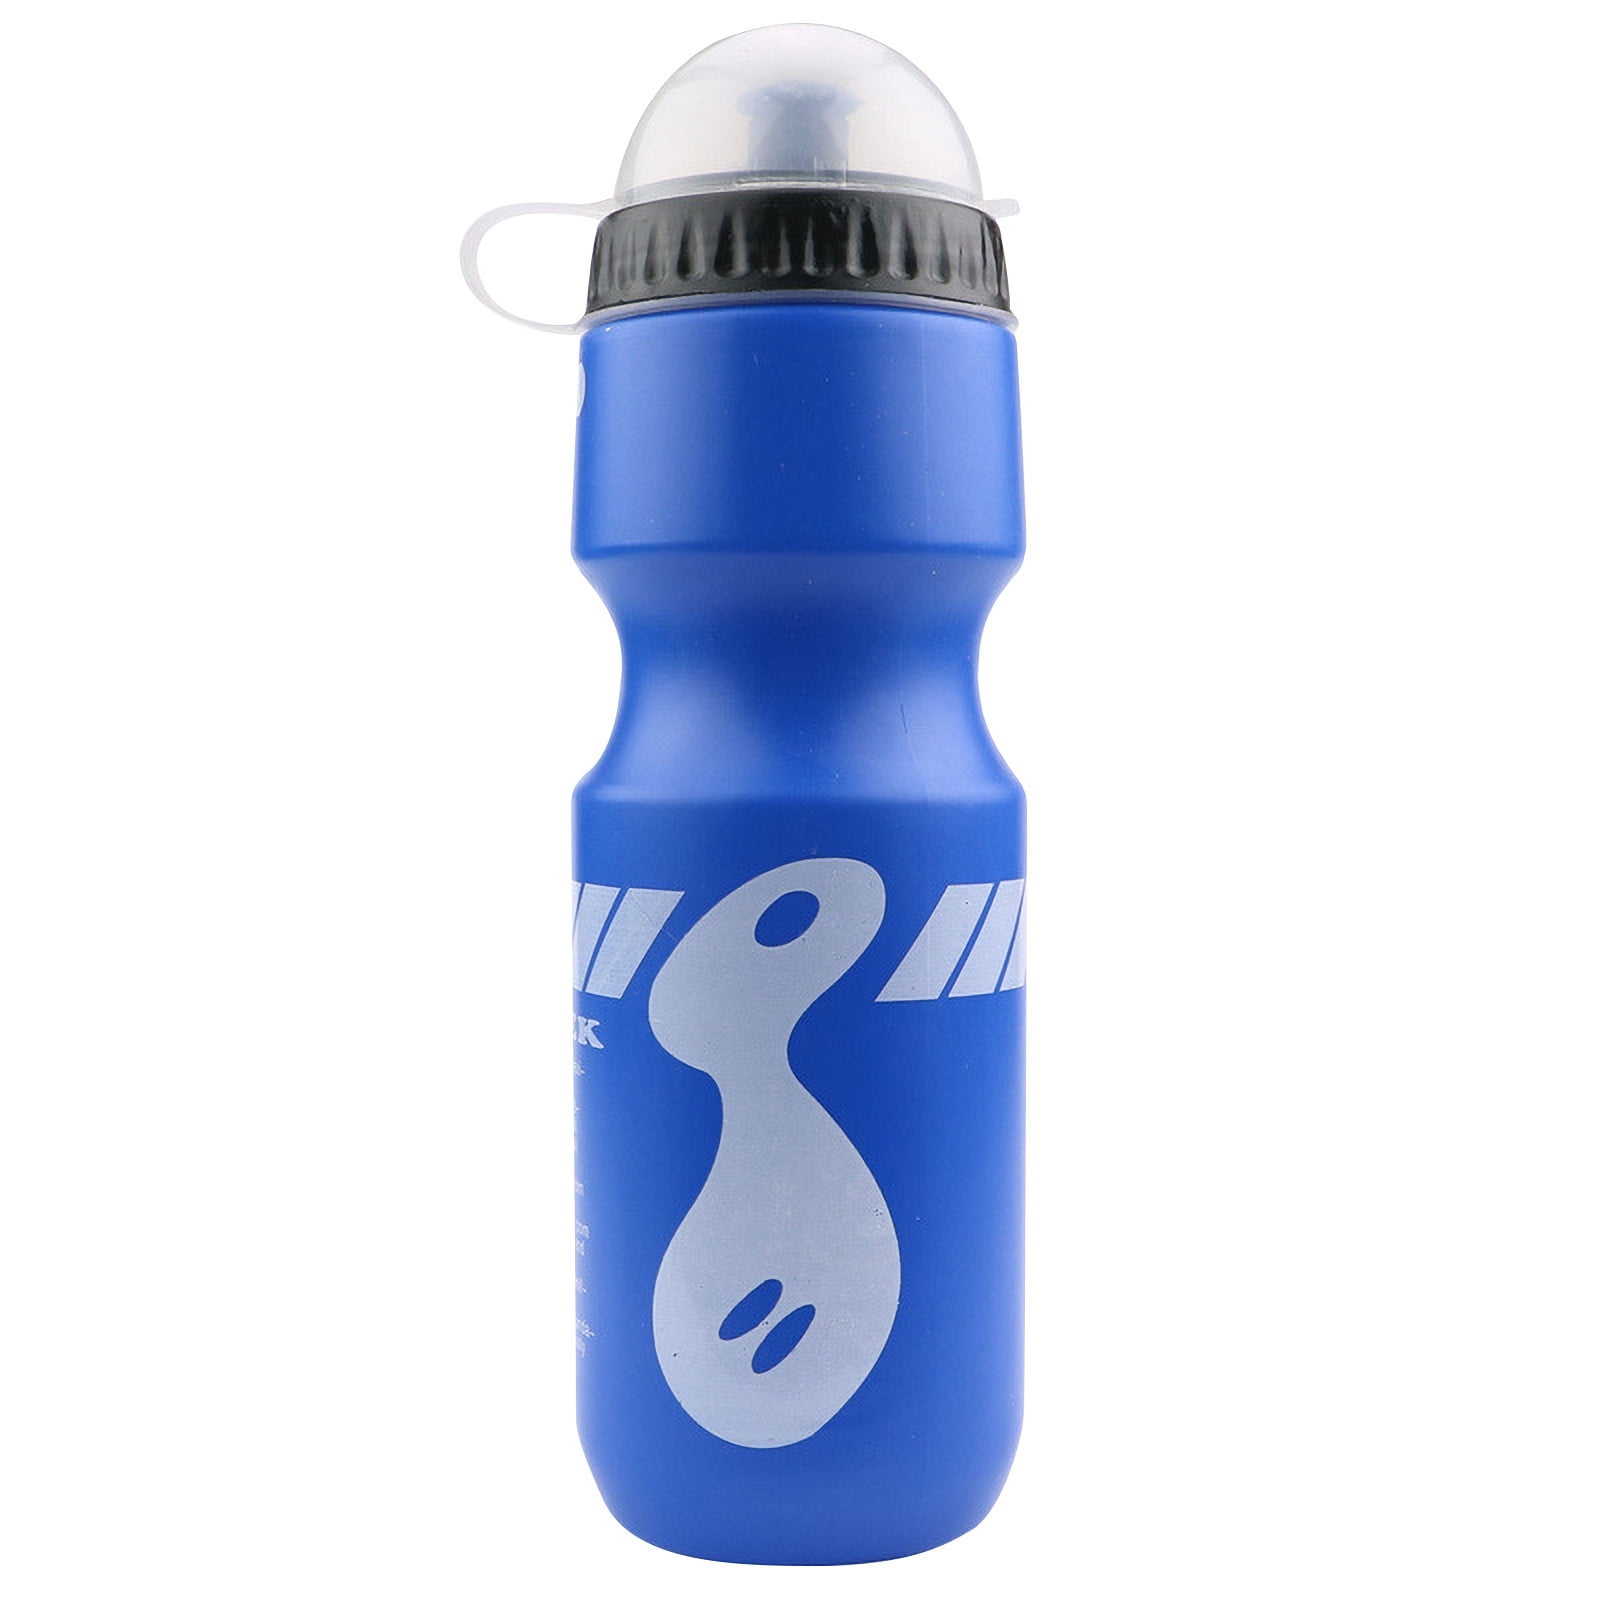 QIIBURR Plastic Water Bottle with Straw 680Ml Outdoor Cycling Sports  Plastic Water Bottle with Dusts Cap Small Plastic Bottles with Lids Sports  Water Bottle with Straw Water Bottle with Straw Lid 